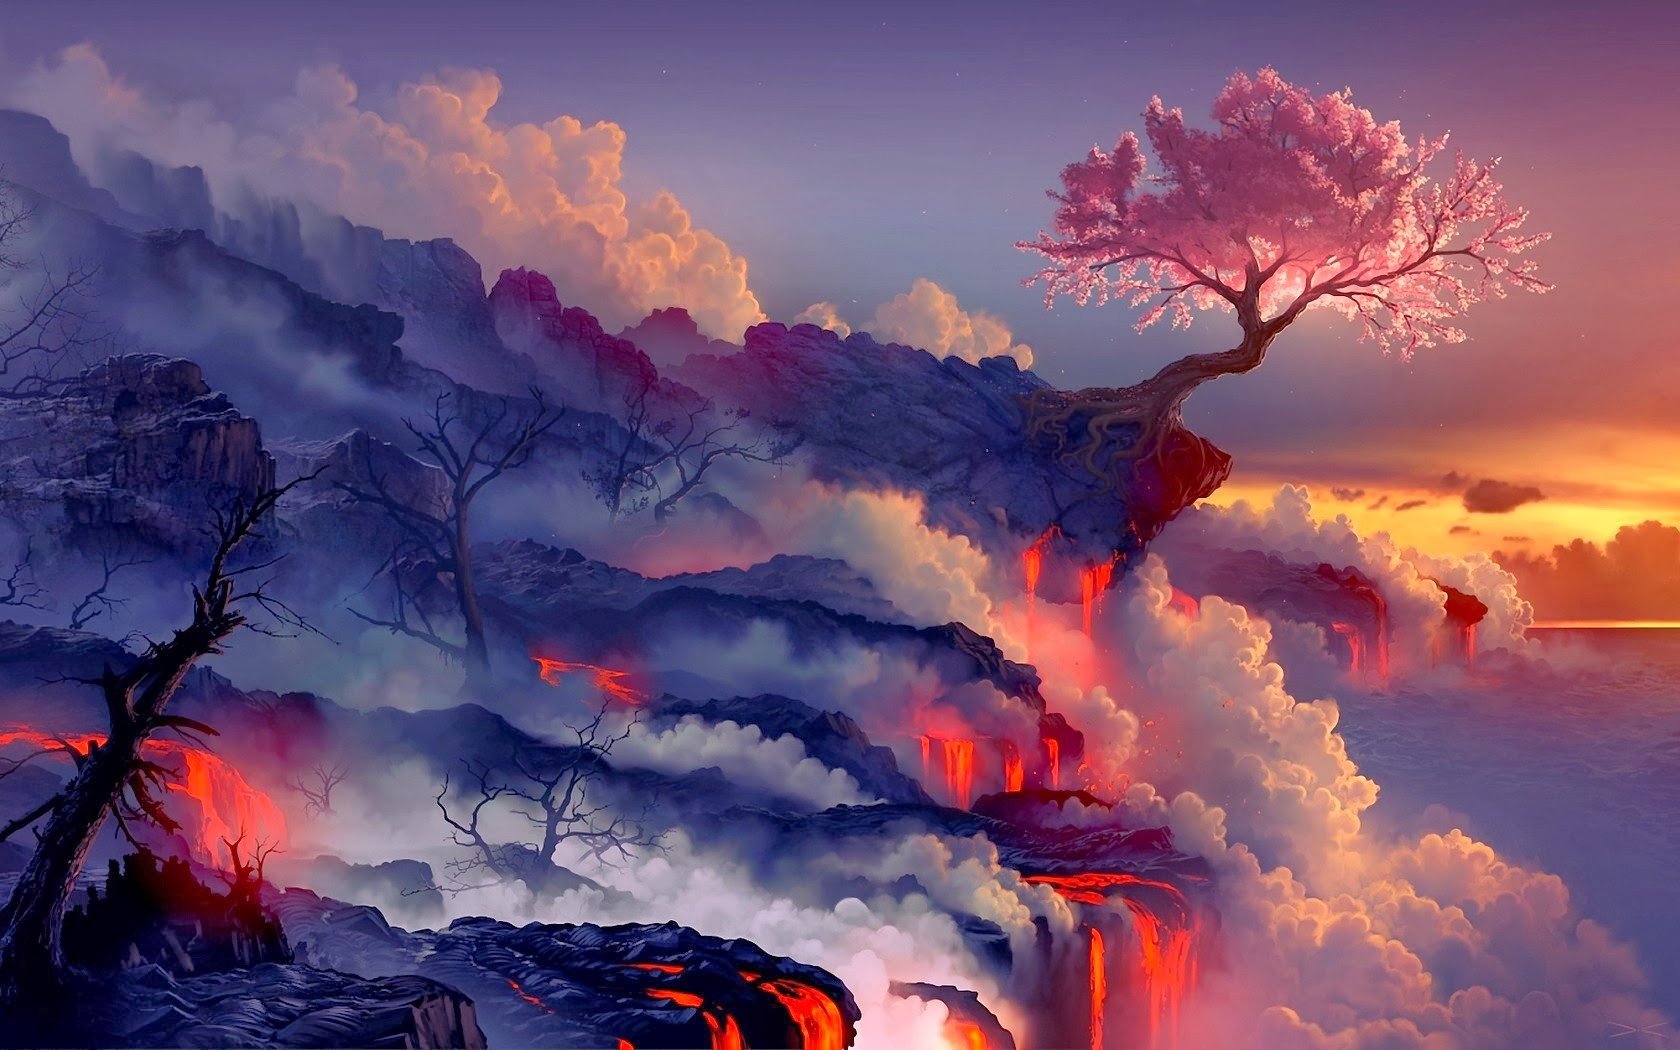 Wallpaper, landscape, fantasy art, sunset, sunrise, evening, cherry blossom, atmosphere, lava, dusk, cloud, dawn, atmospheric phenomenon, computer wallpaper, afterglow, geological phenomenon, red sky at morning 1680x1050